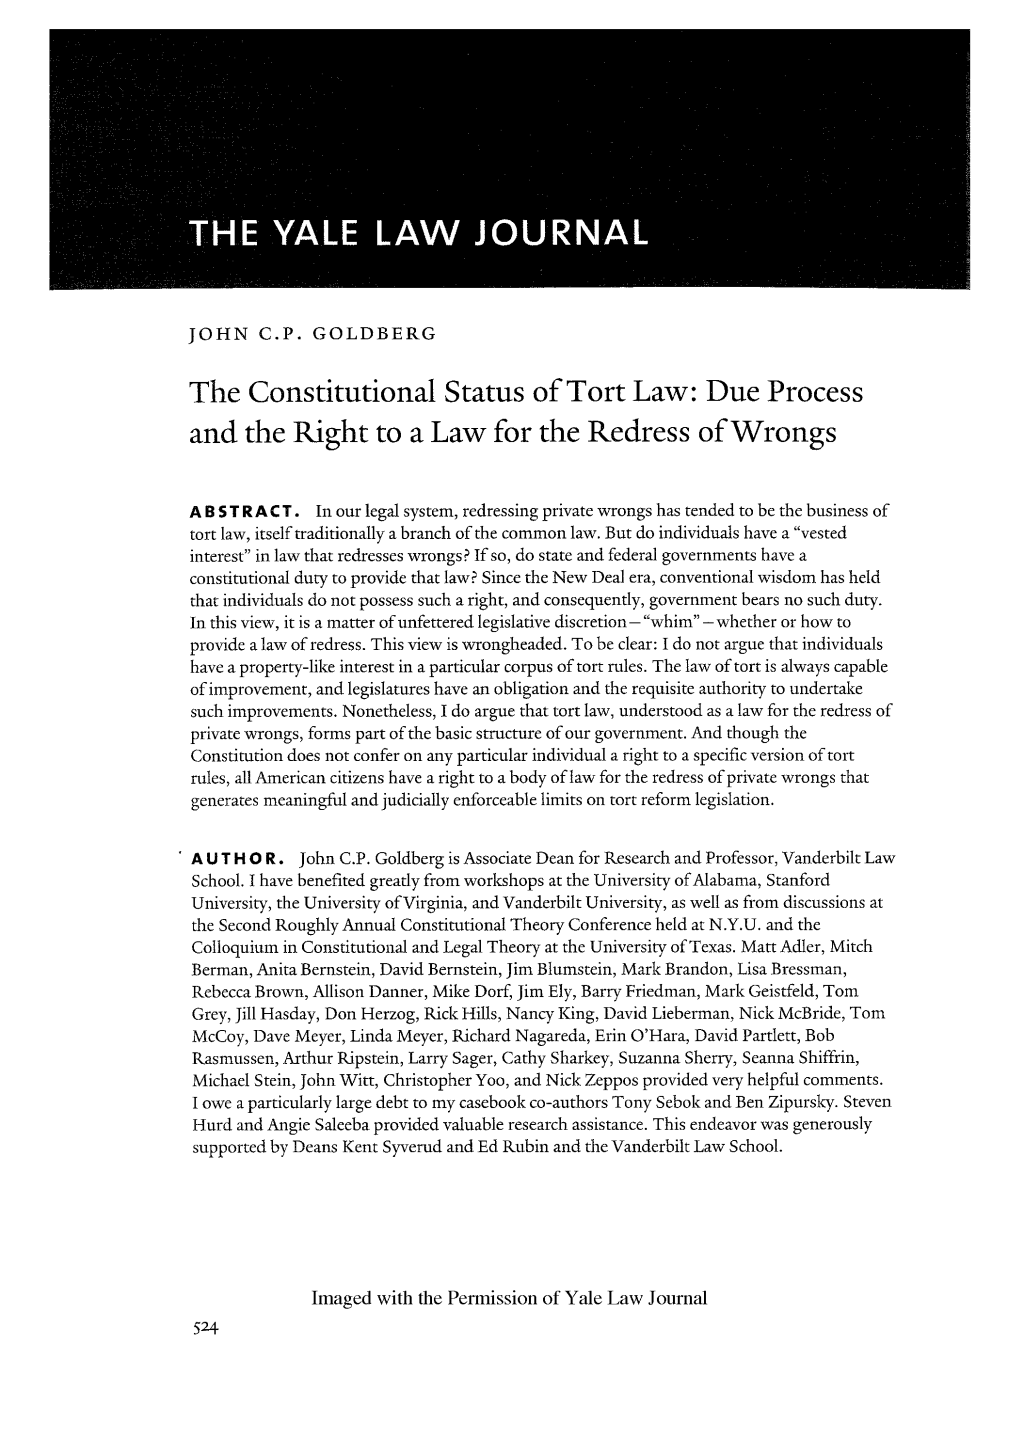 The Constitutional Status of Tort Law: Due Process and the Right to a Law for the Redress of Wrongs